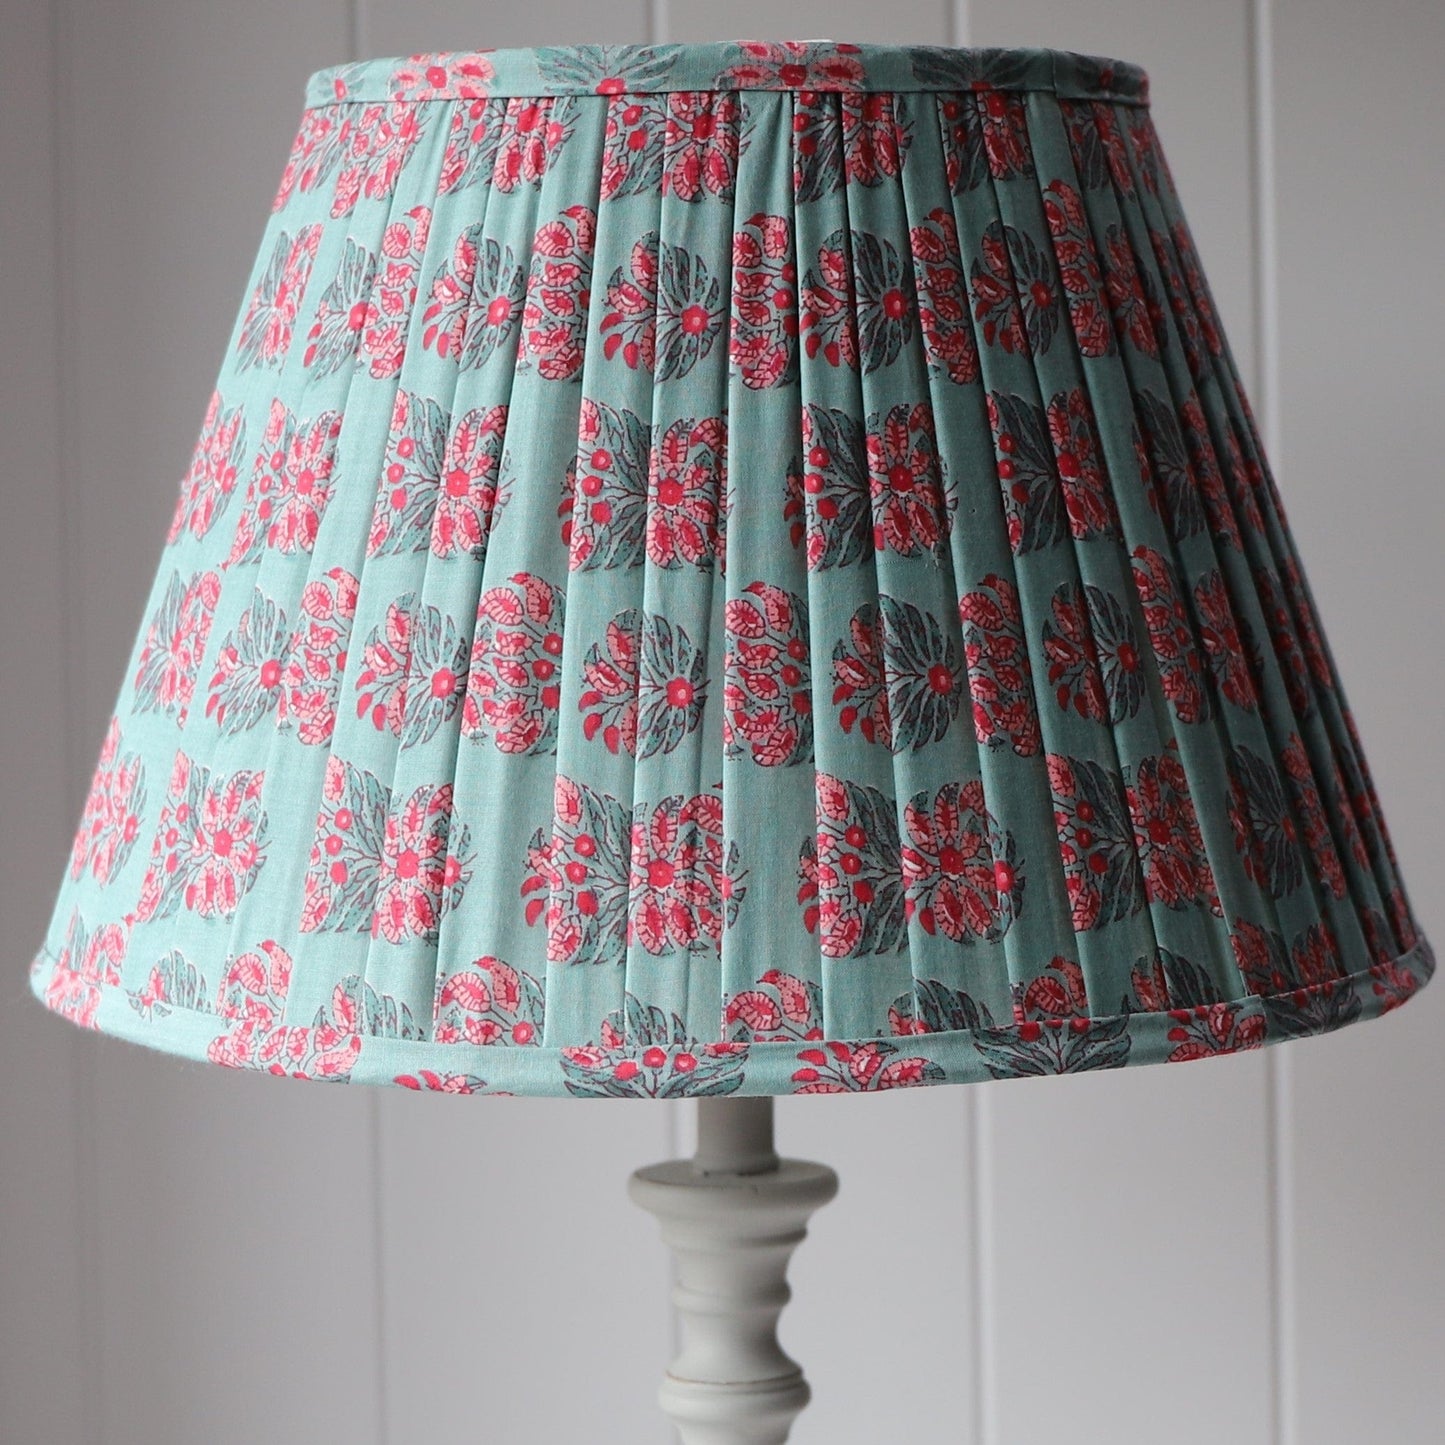 Outside Suppliers Empire Lampshade - Red Botanical on Dark Green 19507